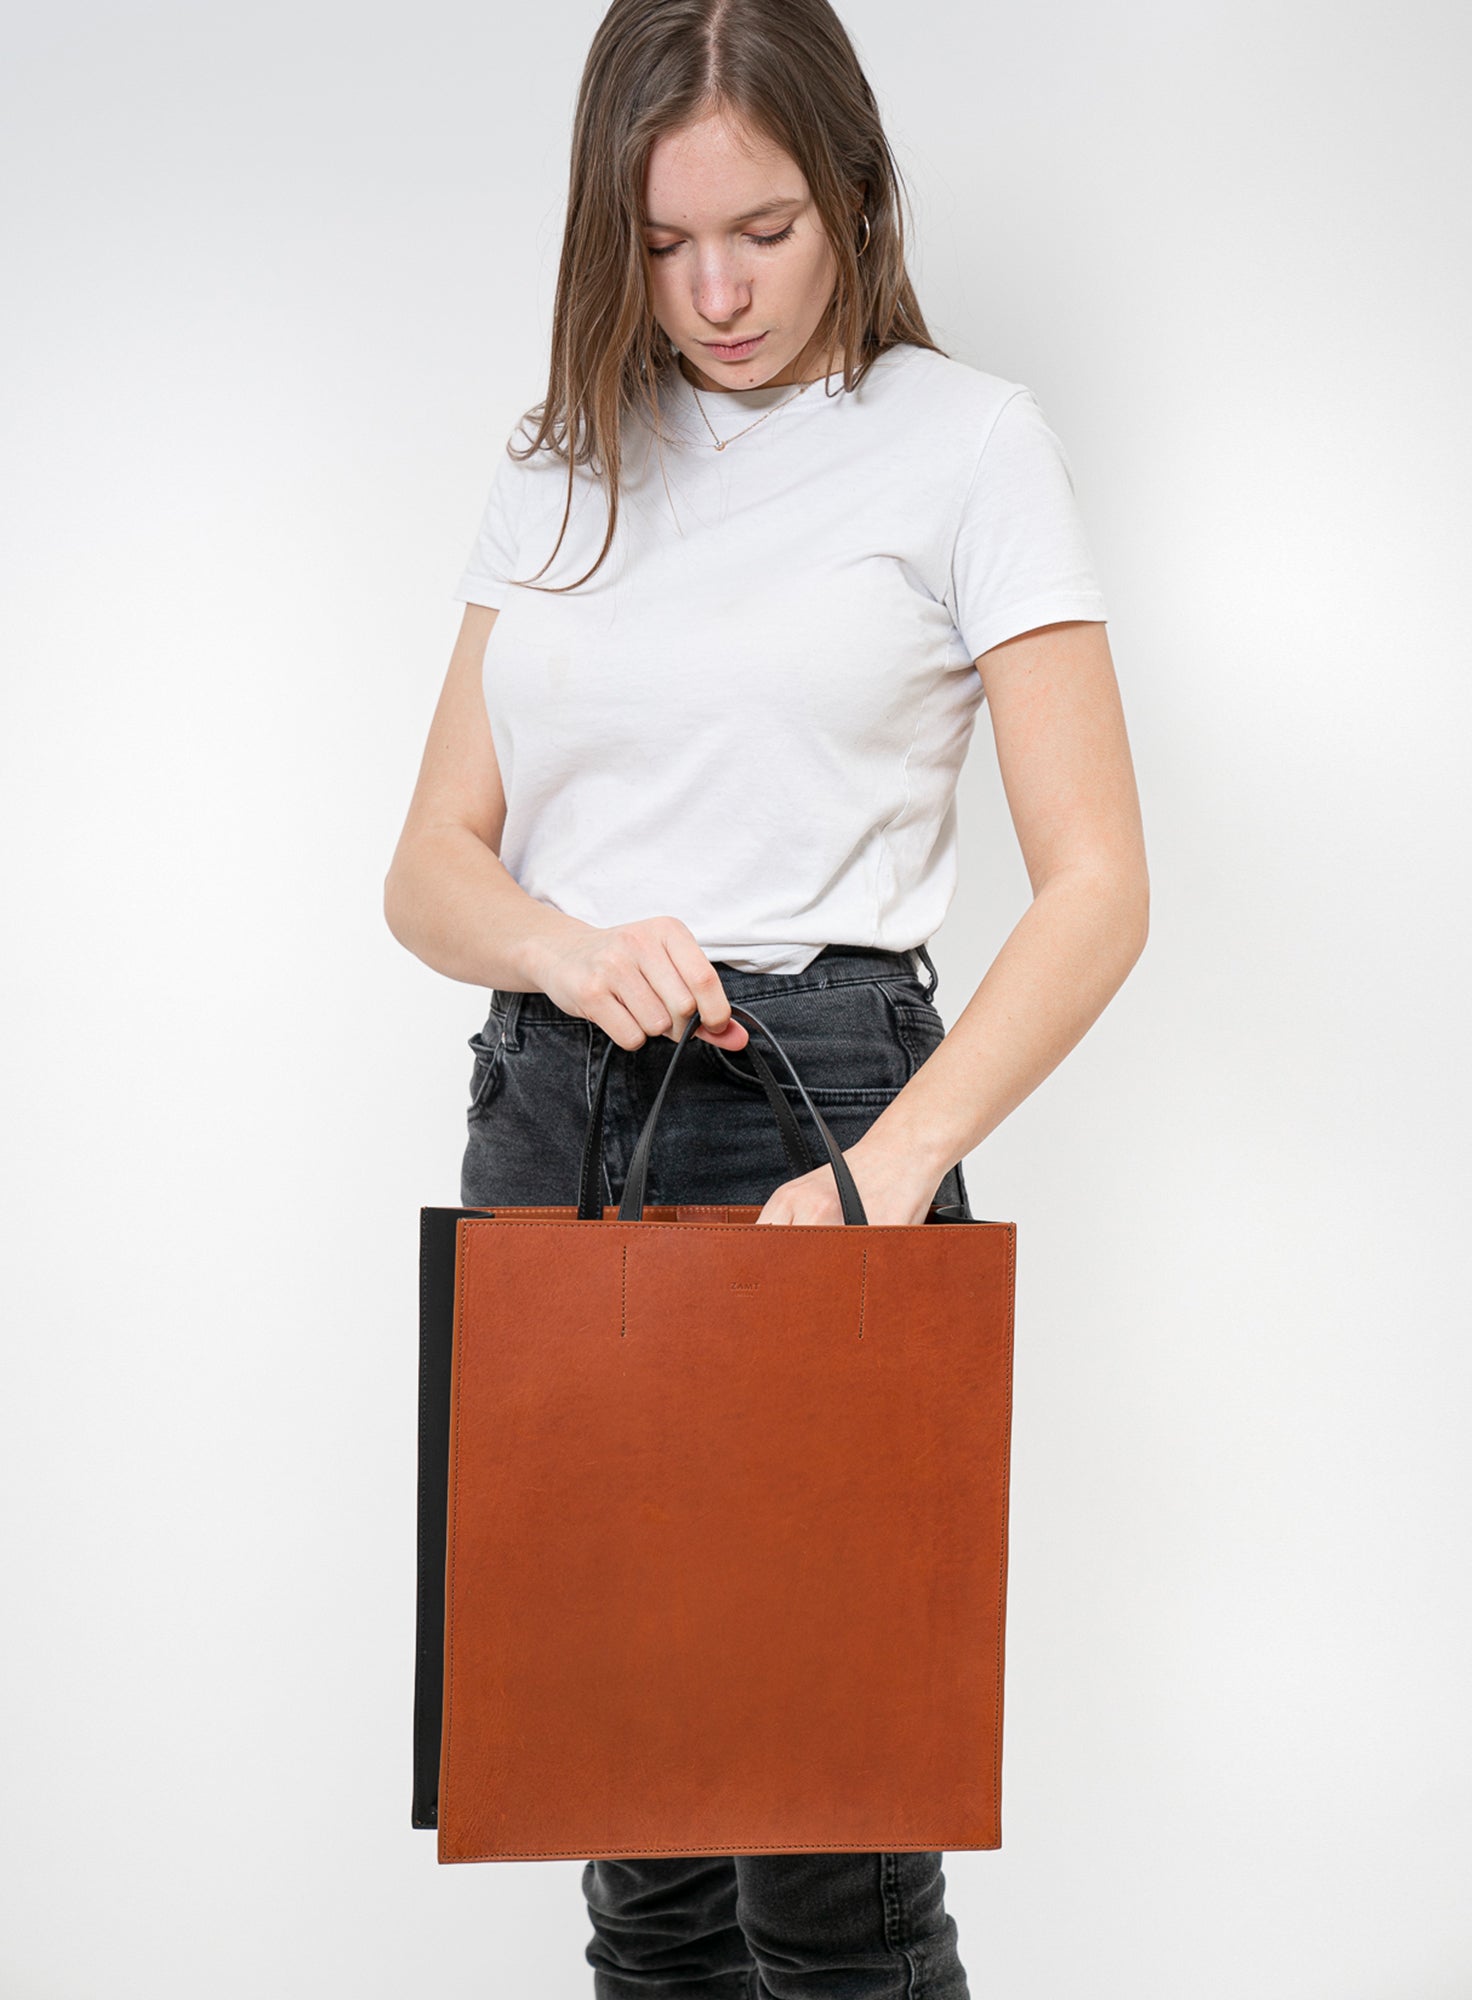 CONTAINER_BAG_FINCH_BROWN_AND_BLACK_Designed_in_Berlin_Made_to_last_Handmade_in_Poland.